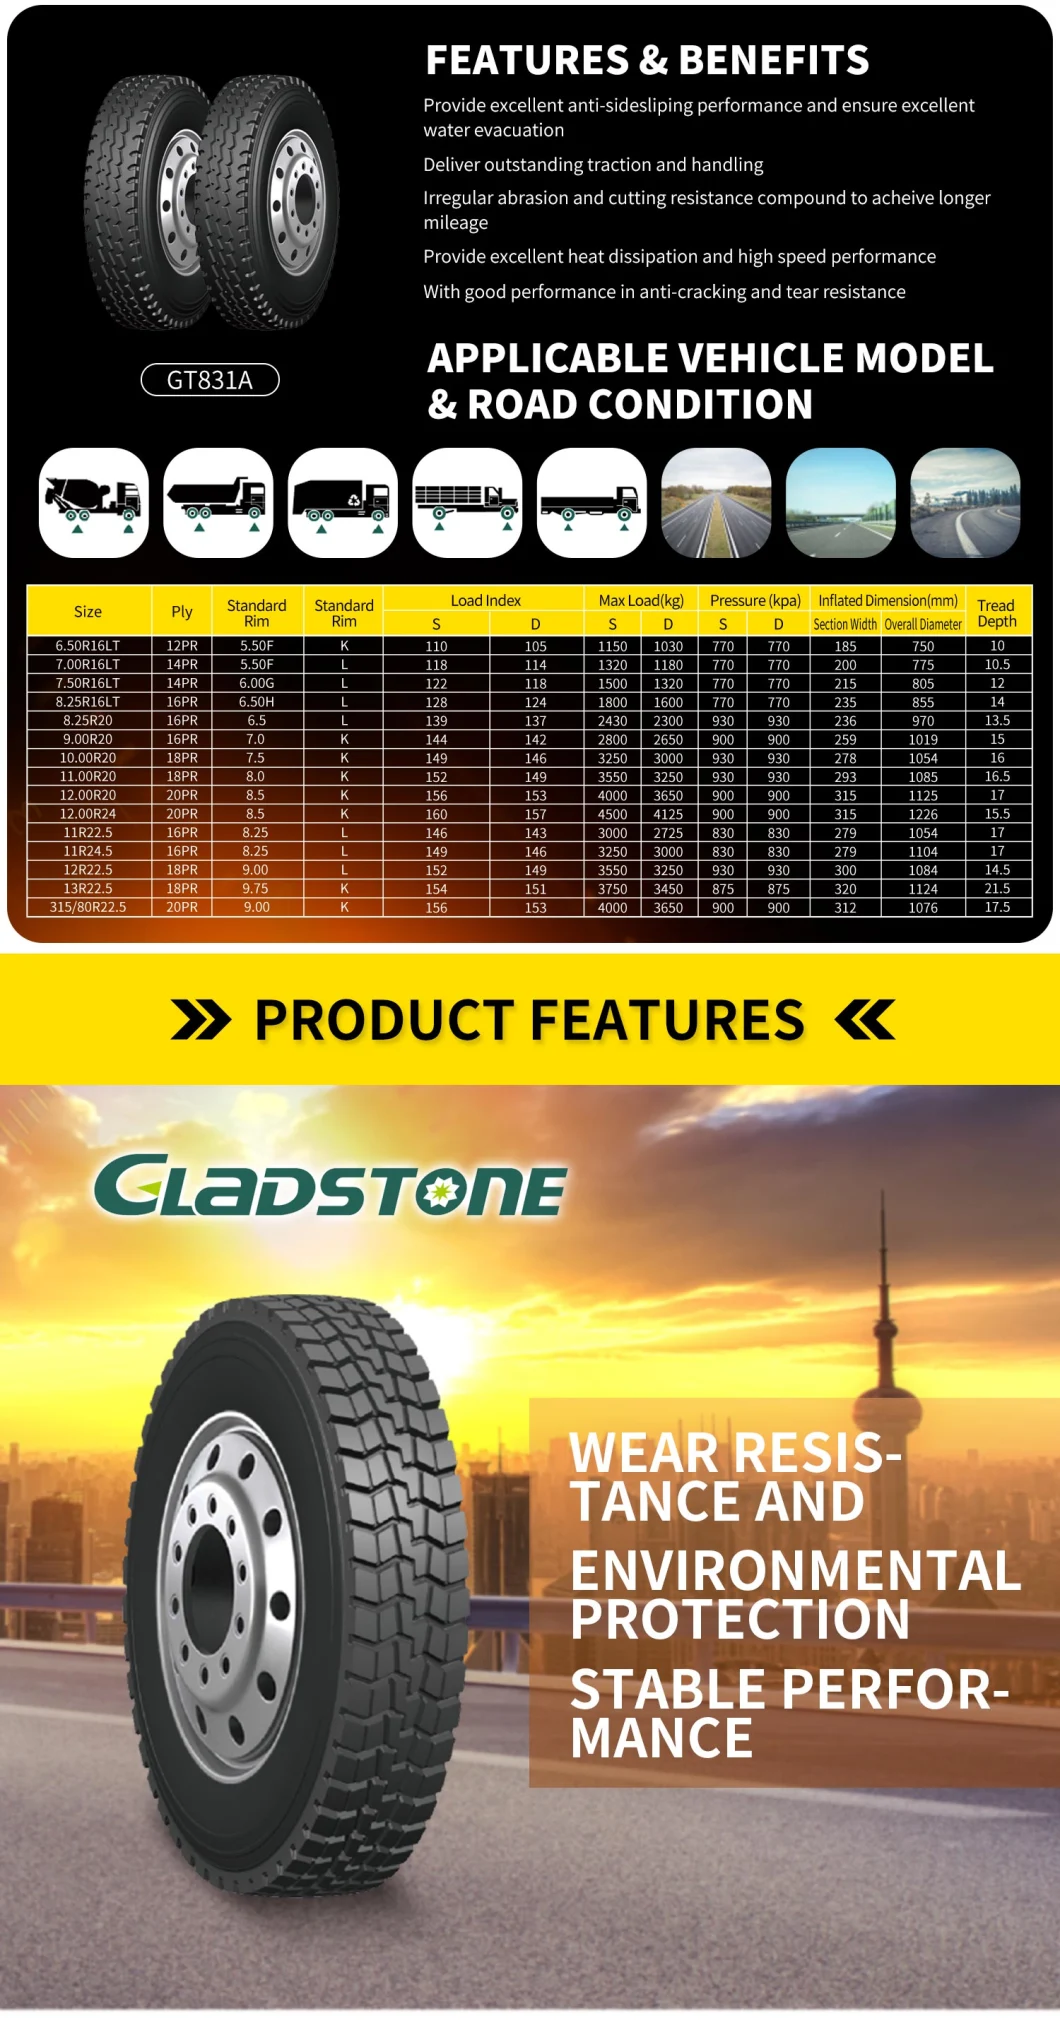 Doupro Brand Cheap Wholesale Chinese Heavy Duty Truck Tire 12.00r20 1200r20 1220 12r20 Truck Tire